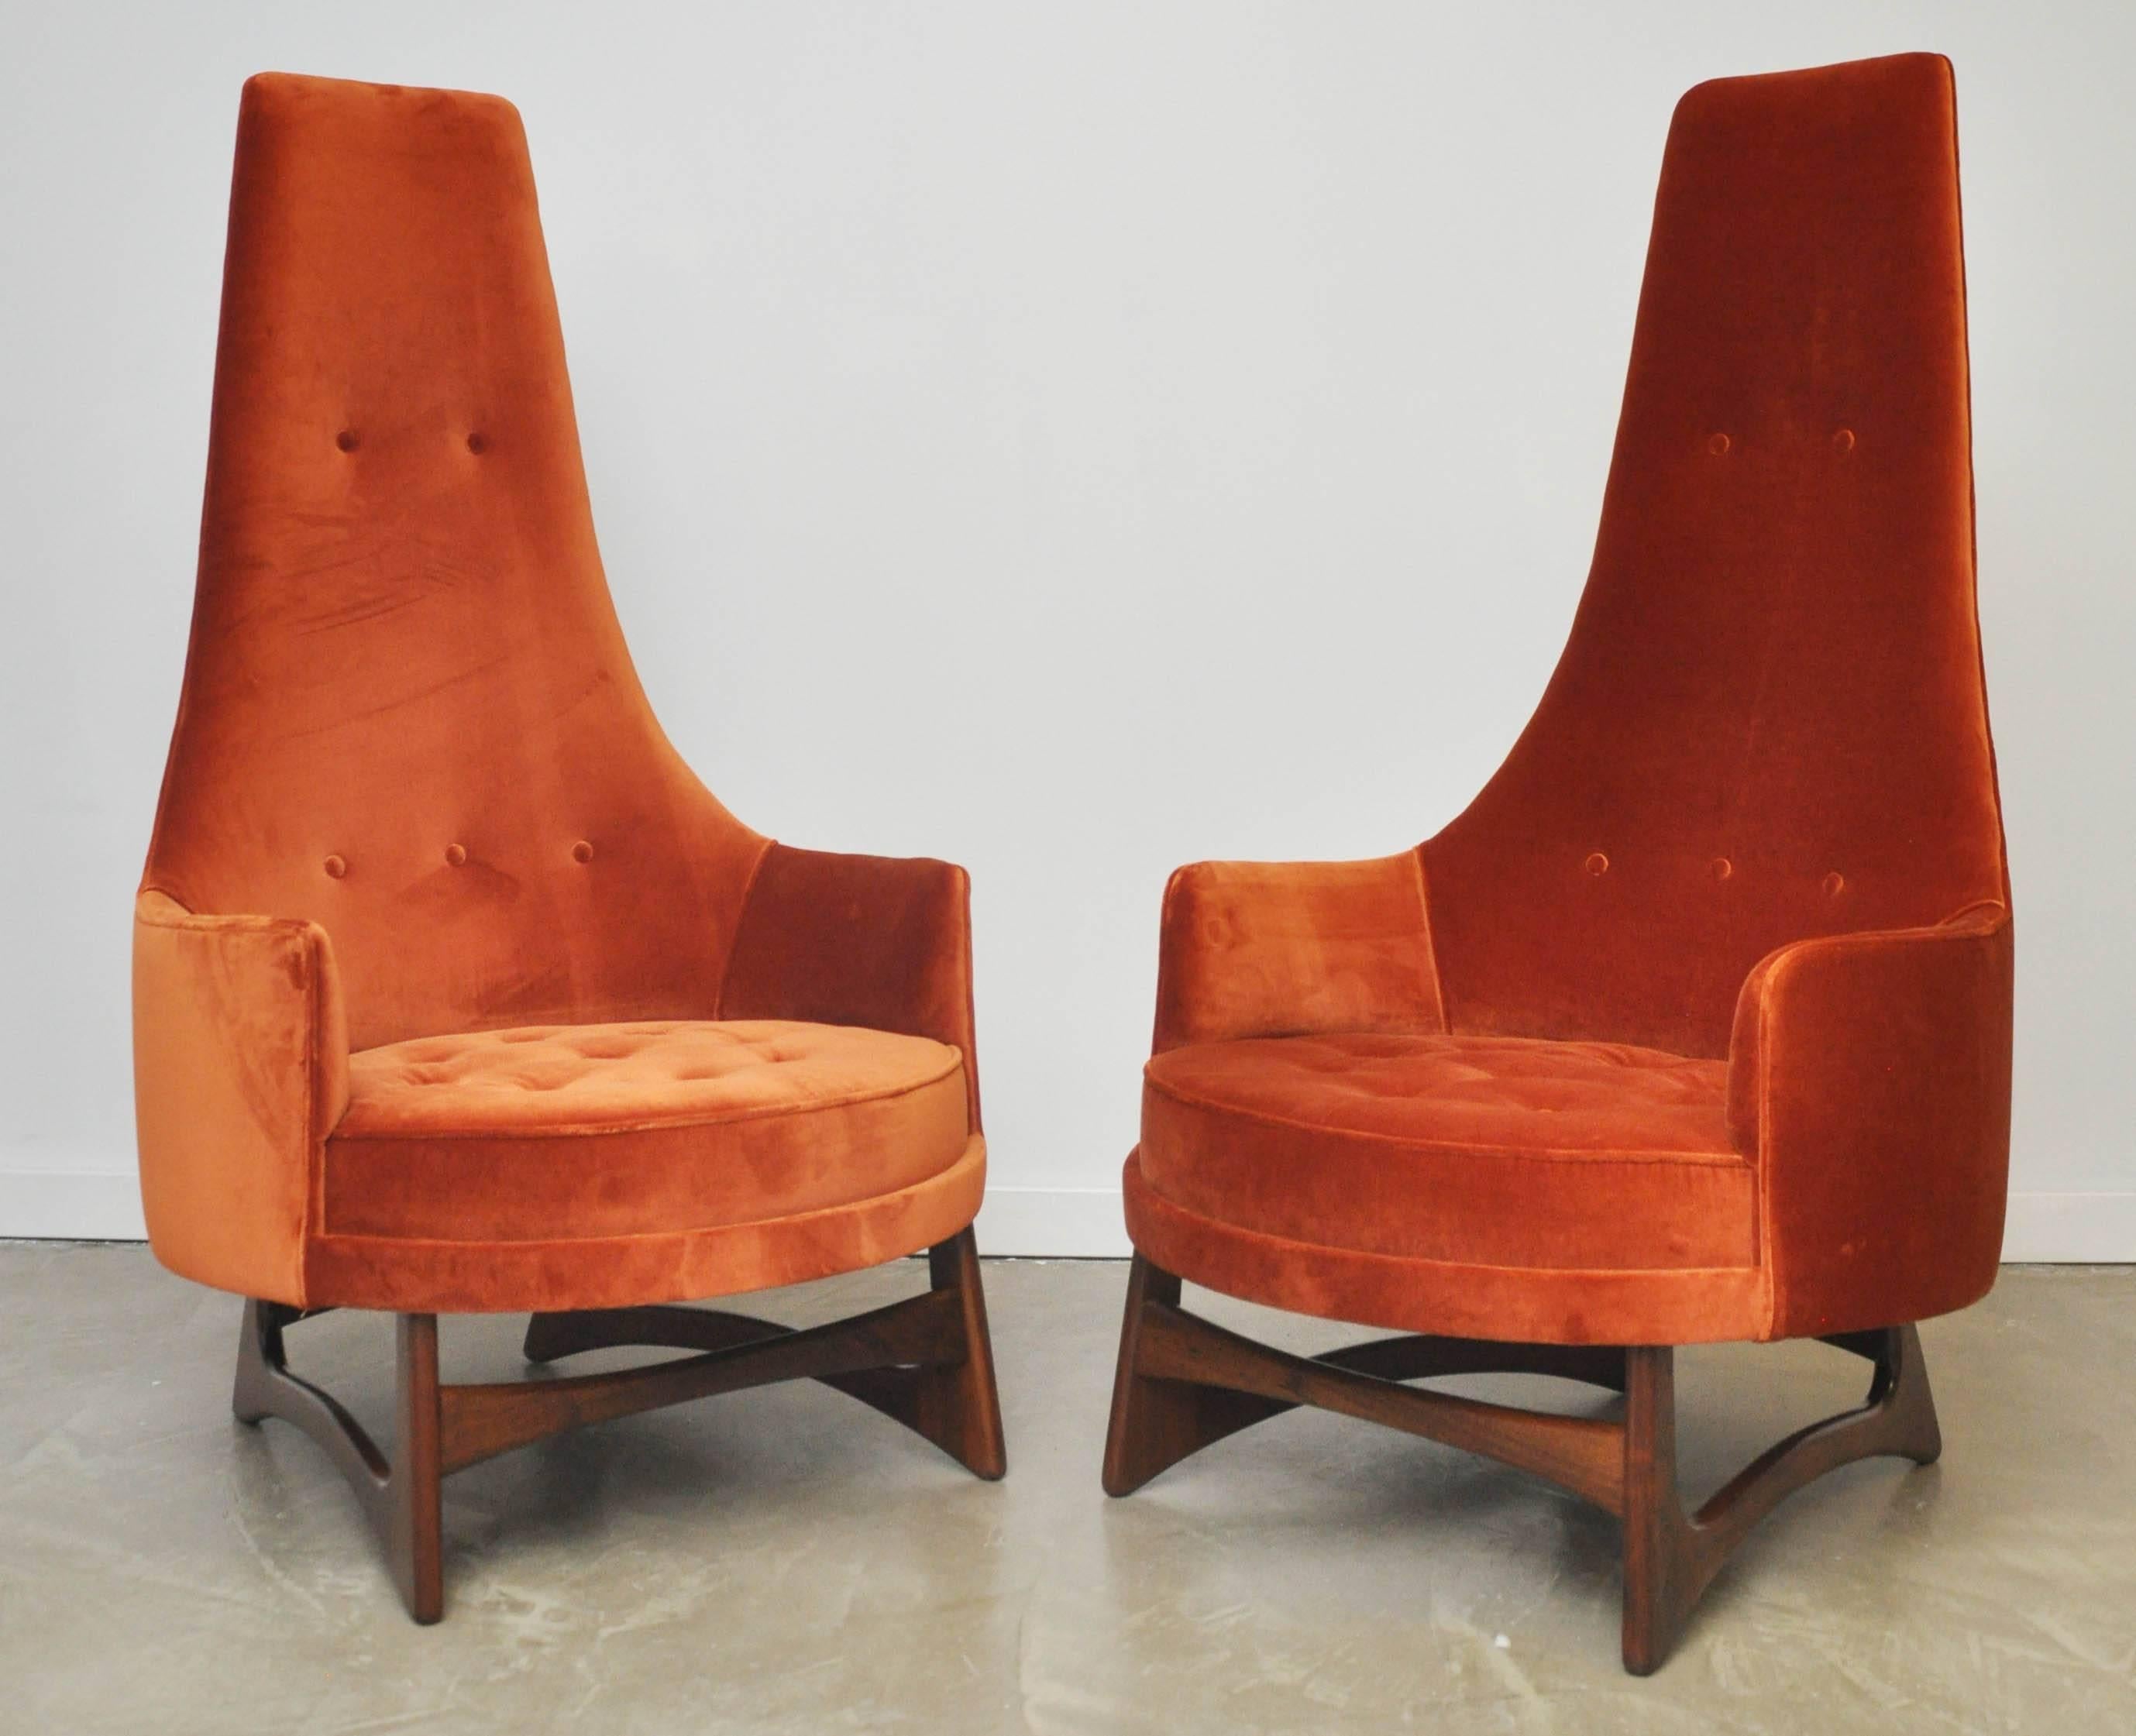 Dramatic lounge chairs by Adrian Pearsall on sculptural walnut bases. Fully restored and reupholstered in velvet.